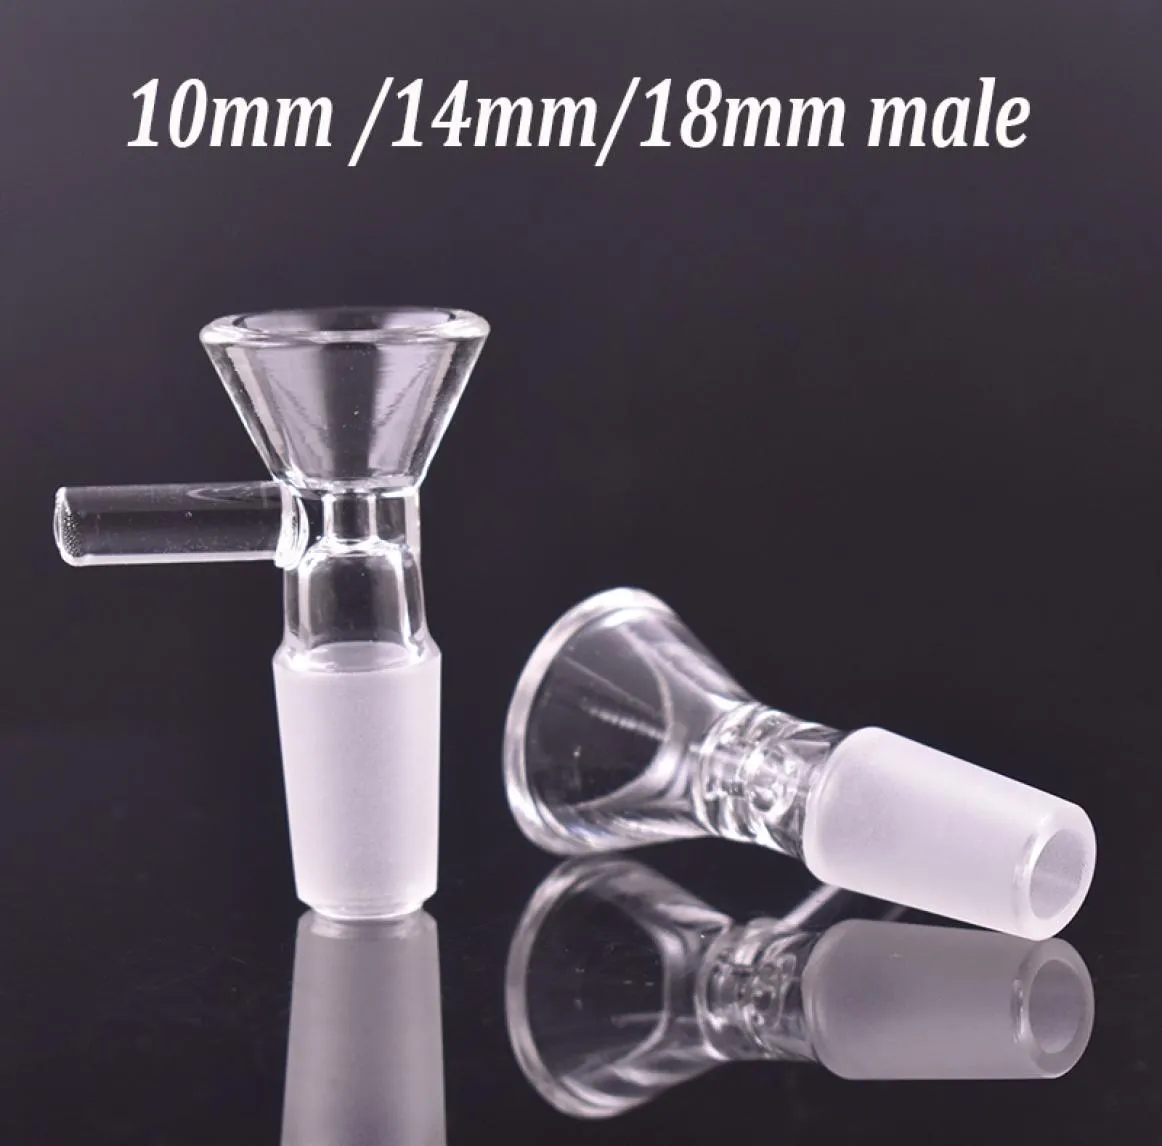 10mm 14mm 18mm male female Thick Bowl Piece for Glass Bong slides Funnel Bowls Pipes smoking bowls heady oil rigs pieces accessori8711043